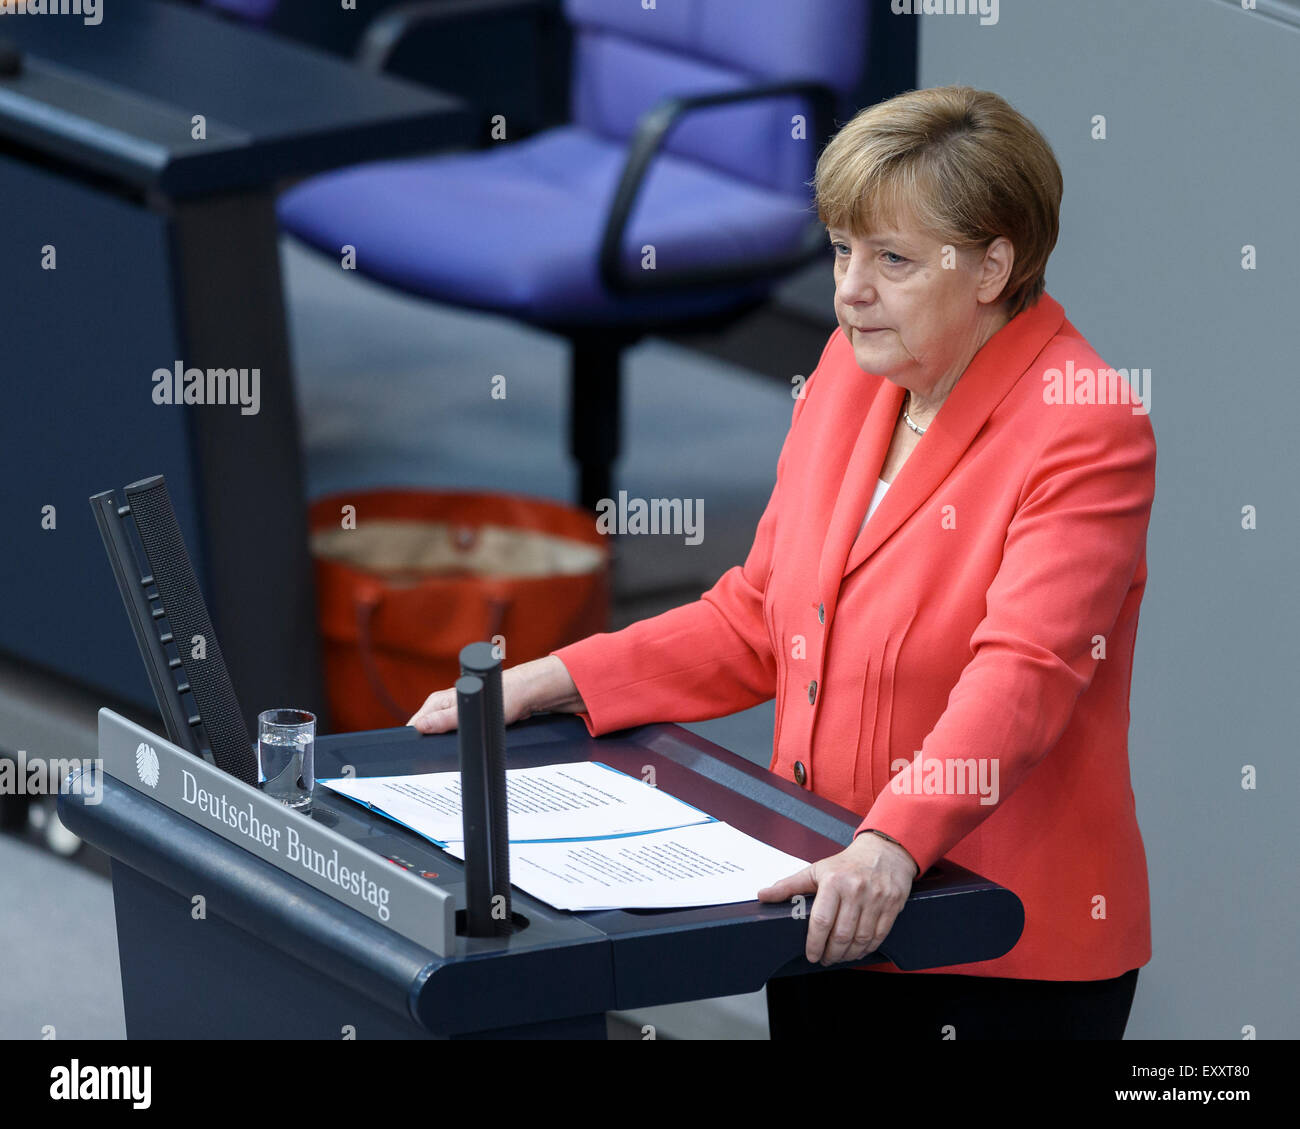 Berlin, Germany. 17th July, 2015. Special session of the German Parliament - consultation of government on the ' negotiations of the Government Federal relative to the concession of financial support for the Hellenic Republic of Greece ' realized at the German Parliament on 17.07.2015 in Berlin, Germany. / Picture: German Chancellor Angela Merkel during her speech relative to the concession of financial support for the Hellenic Republic of Greece at the Bundestag Credit:  Reynaldo Chaib Paganelli/Alamy Live News Stock Photo